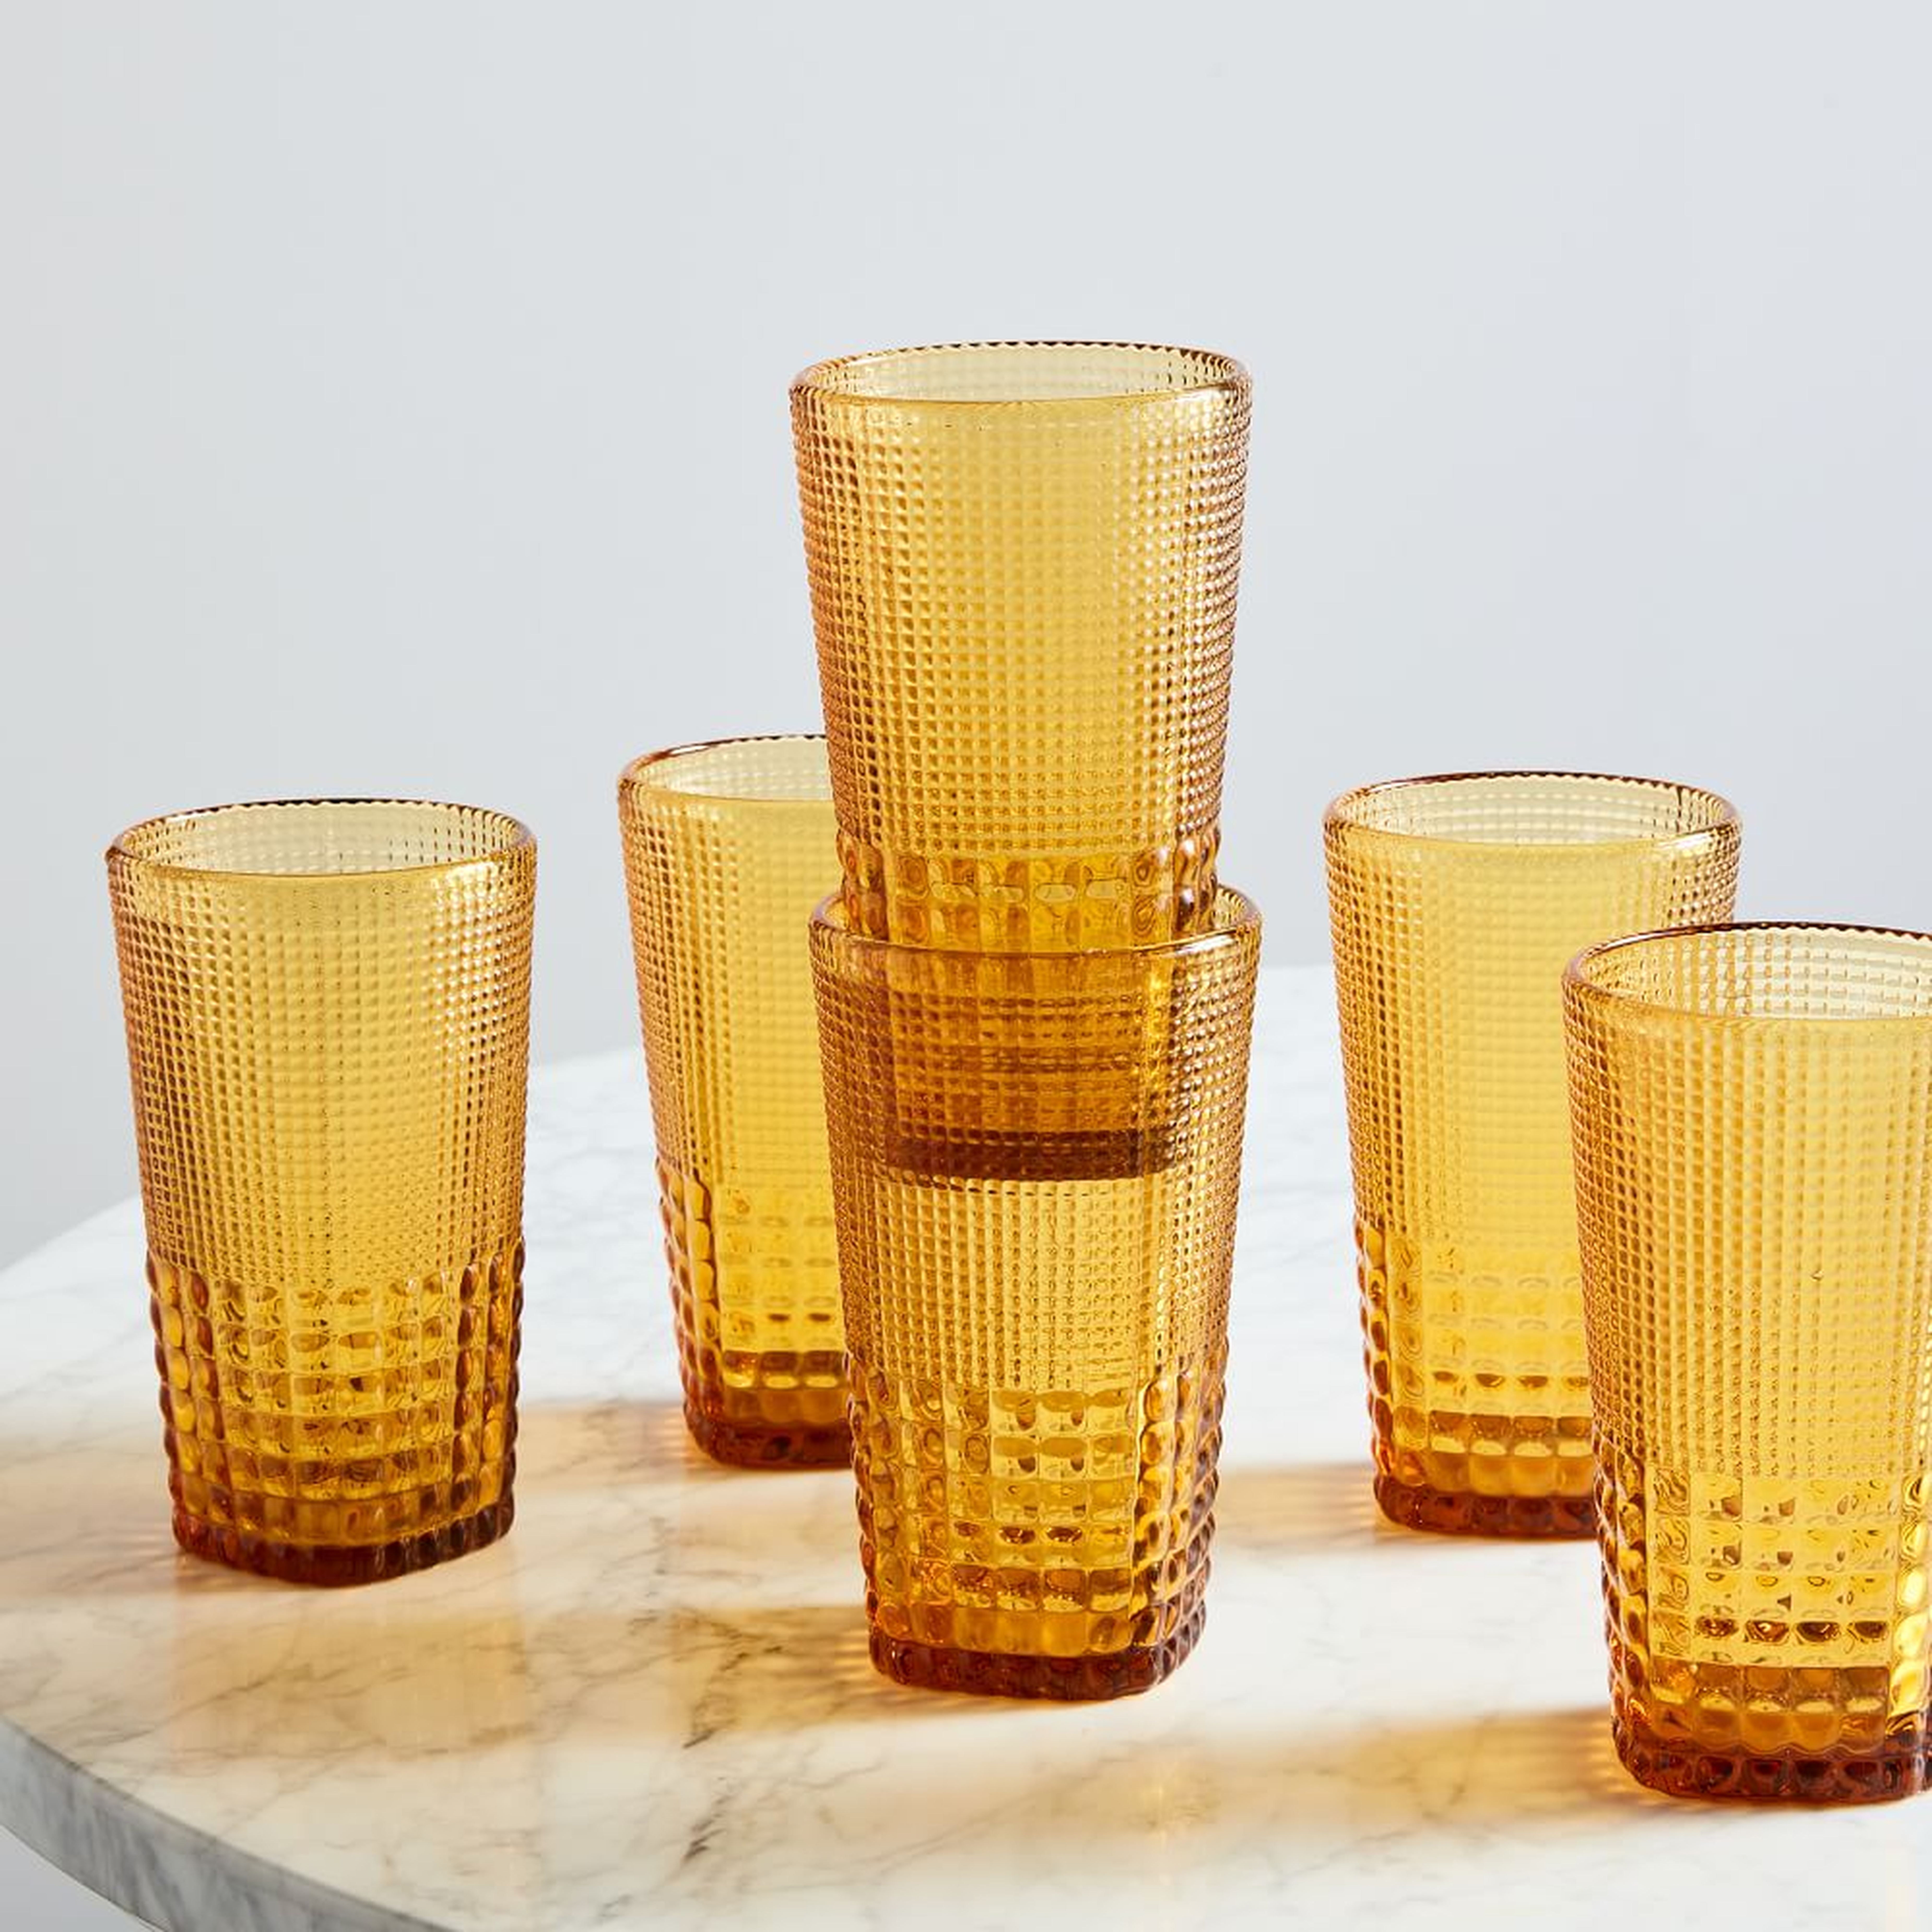 Malcolm Drinking Glass, Tall, Amber, 11.5 oz, Set of 6 - West Elm